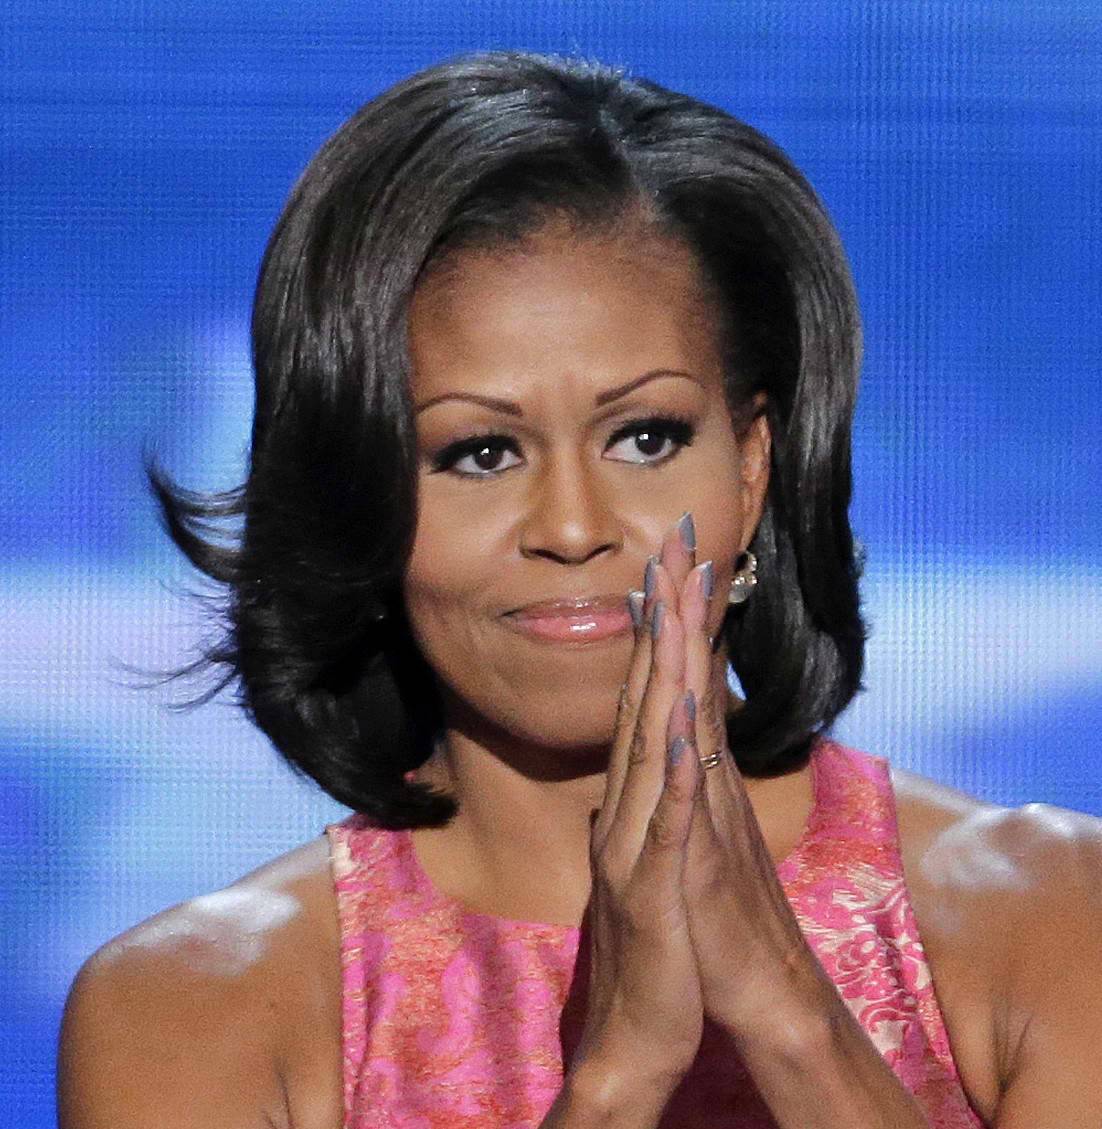 Michelle-Obama-makeup-and-nails.jpg